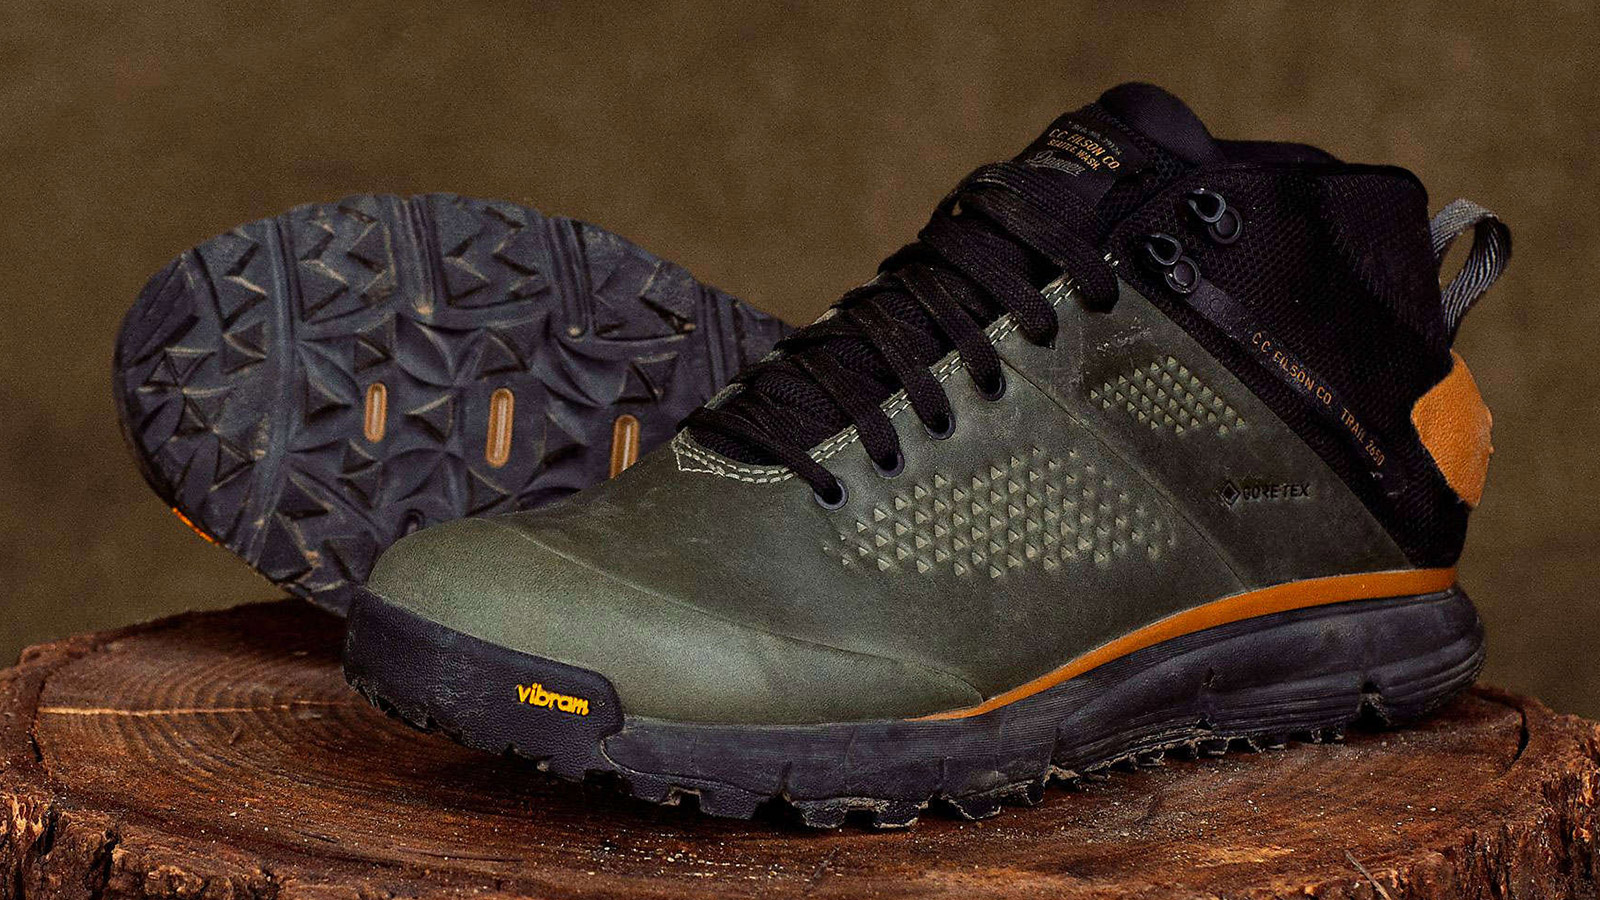 Danner x Filson Trail 2650 Mid Takes On The Great Outdoors - IMBOLDN